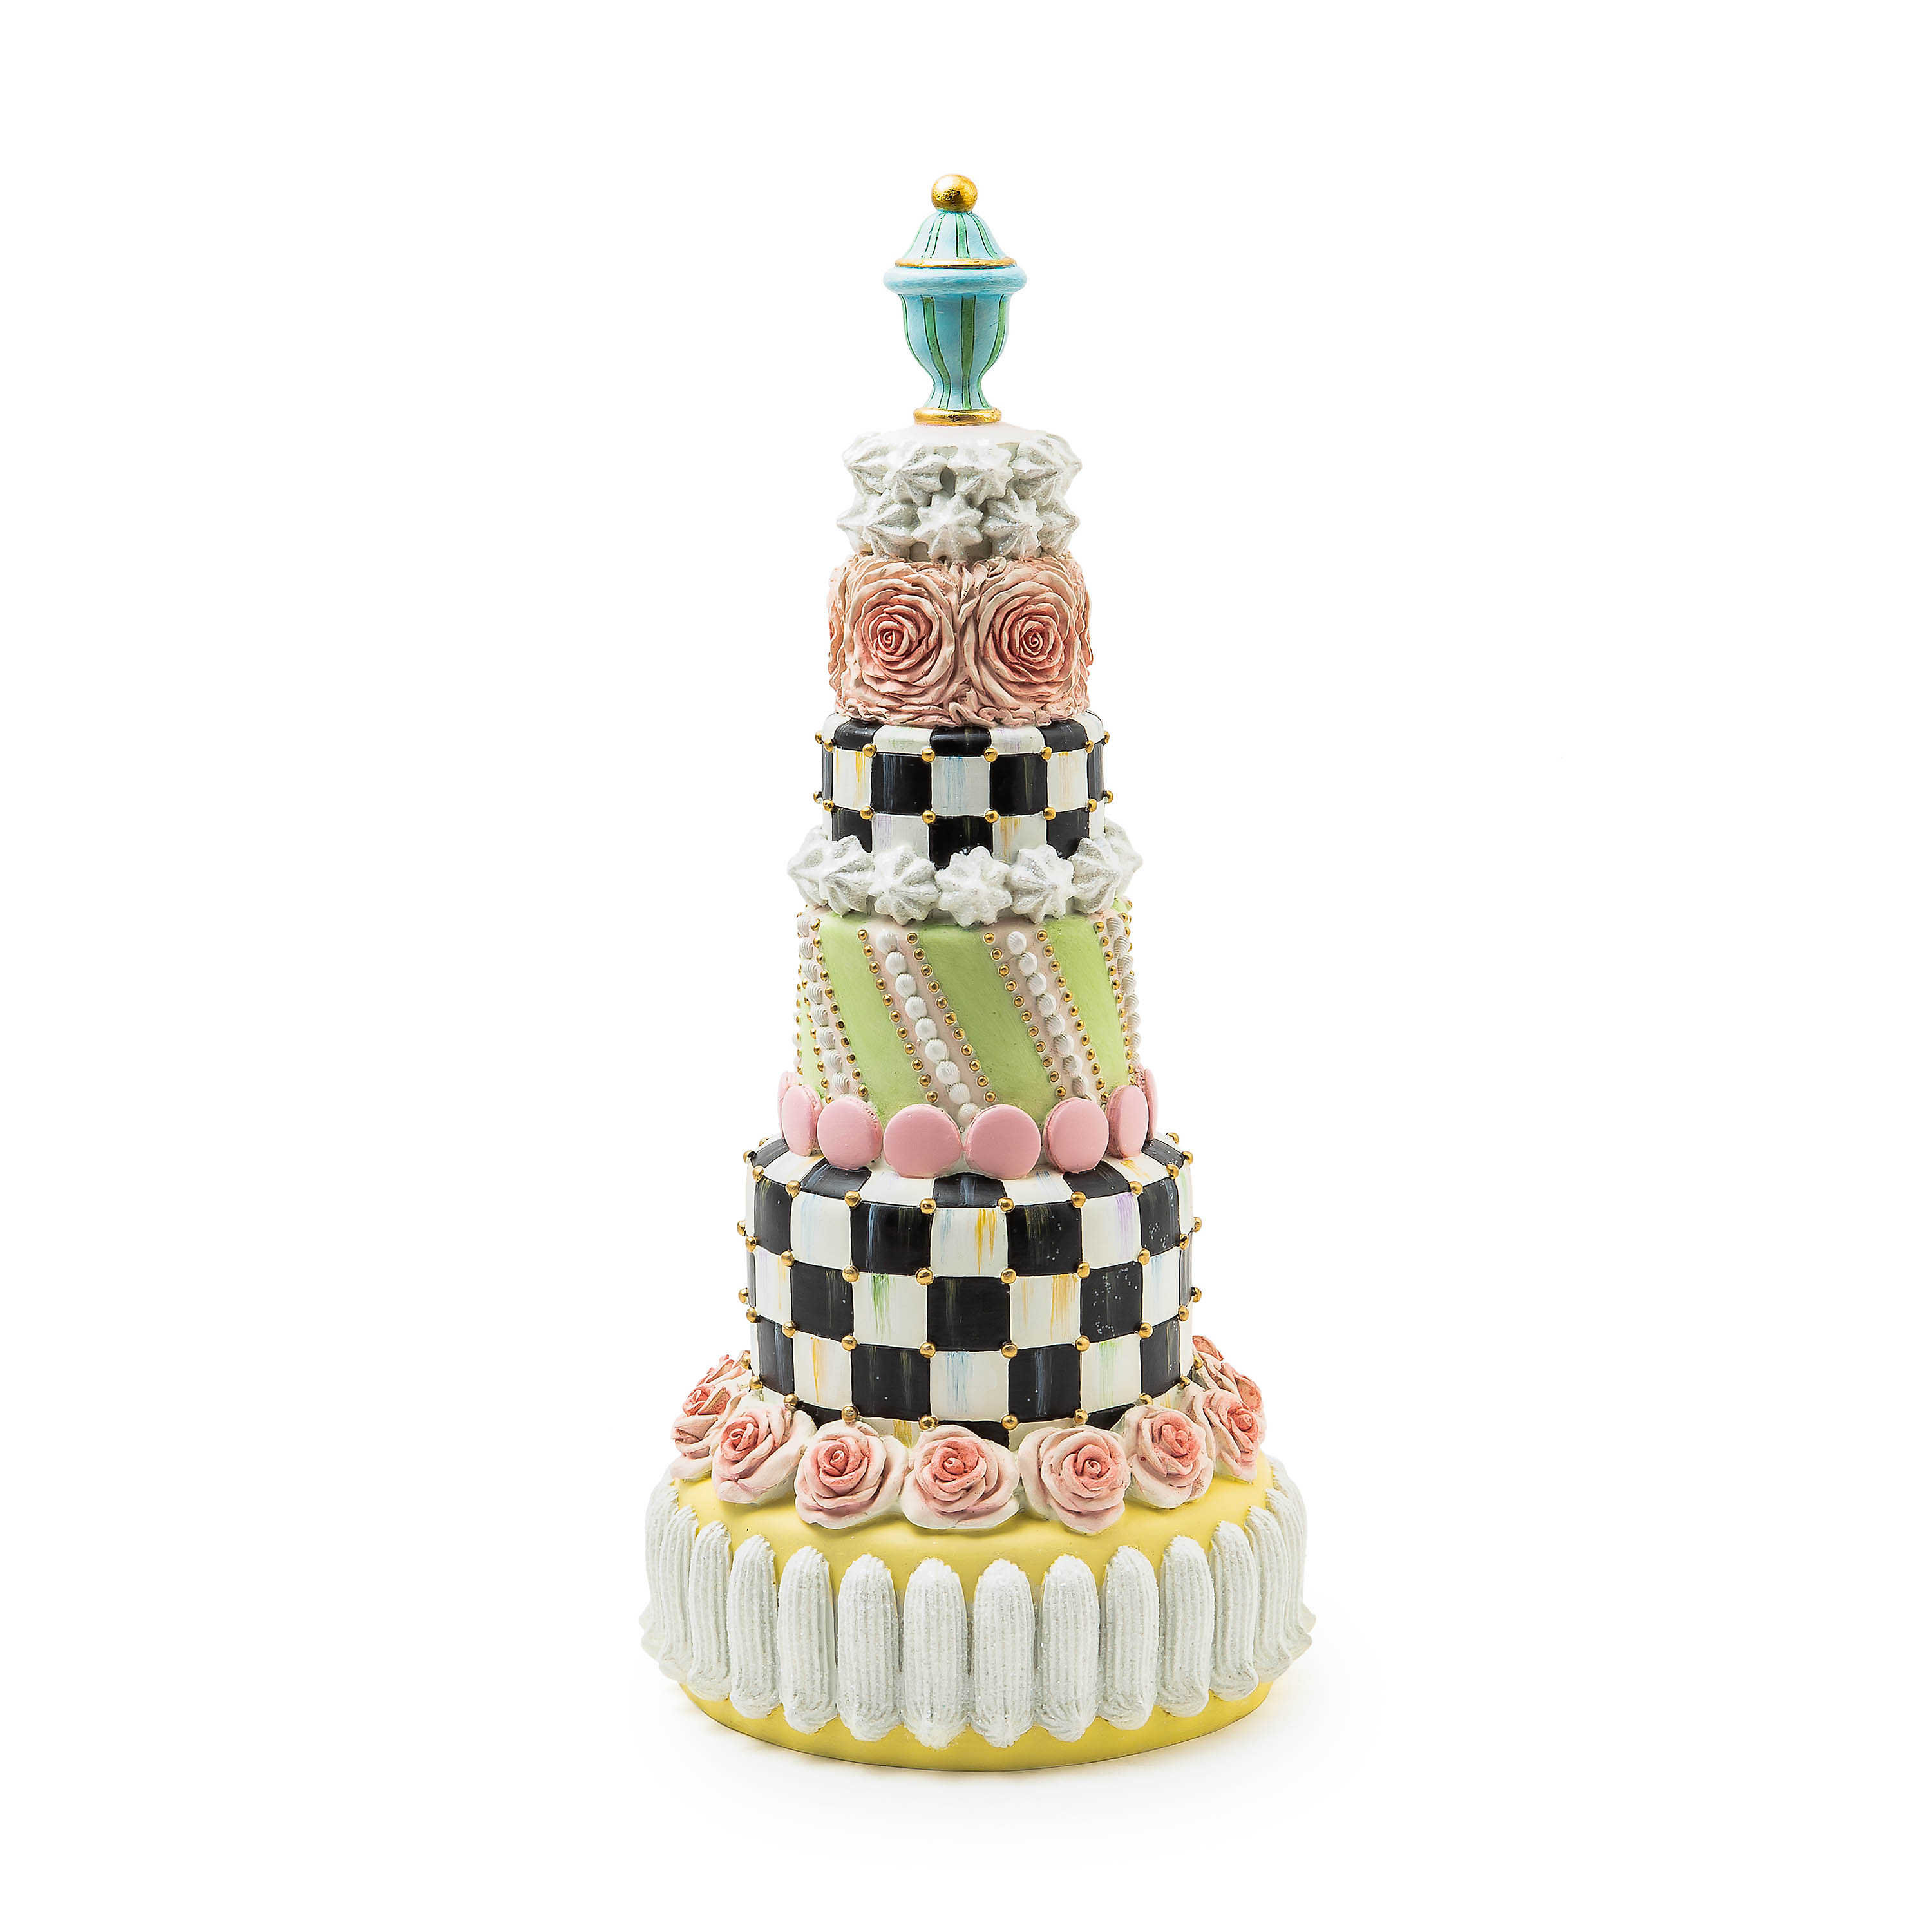 Rose Garden Cake By Joi Gifts in Dubai | Joi Gifts